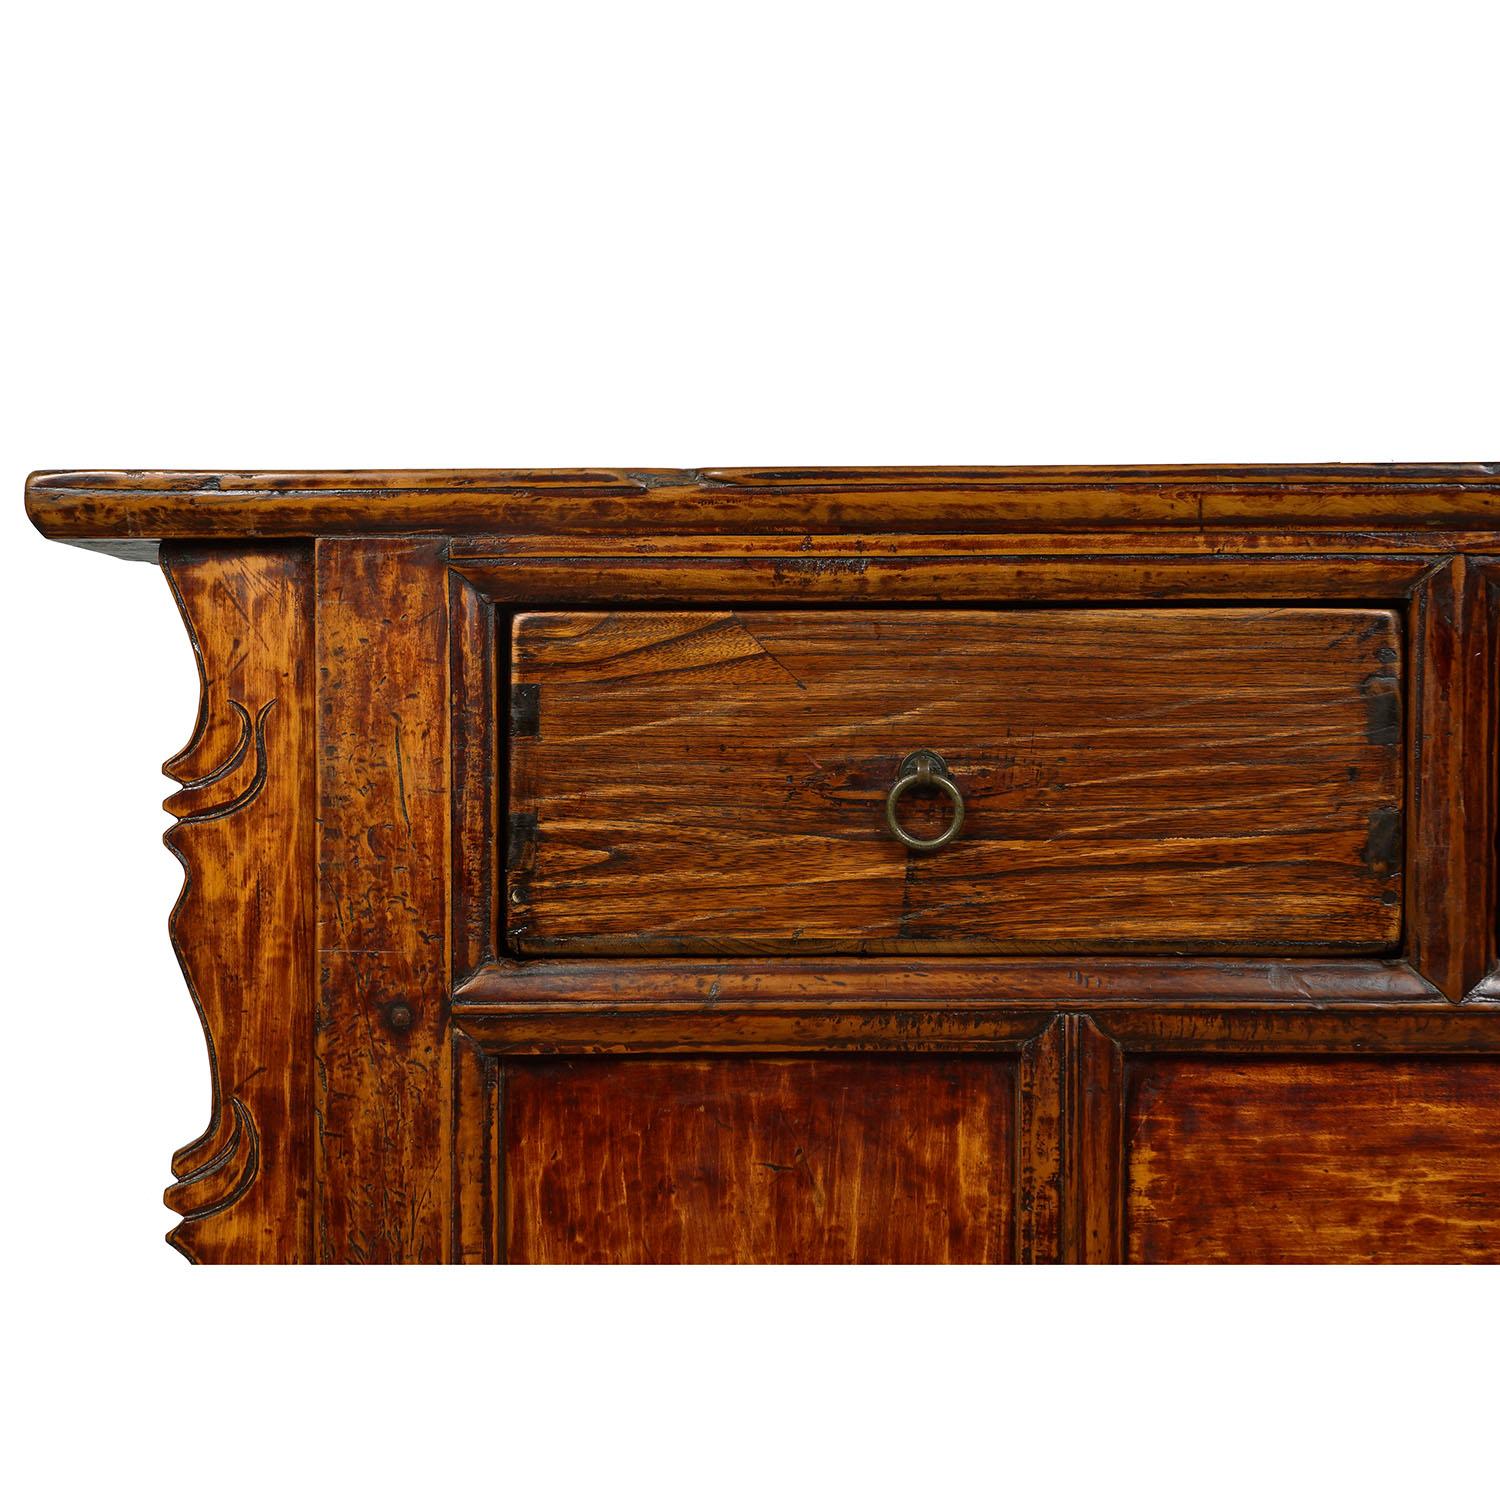 Carved 19th Century Antique Chinese Credenza, Sideboard, Buffet Table For Sale